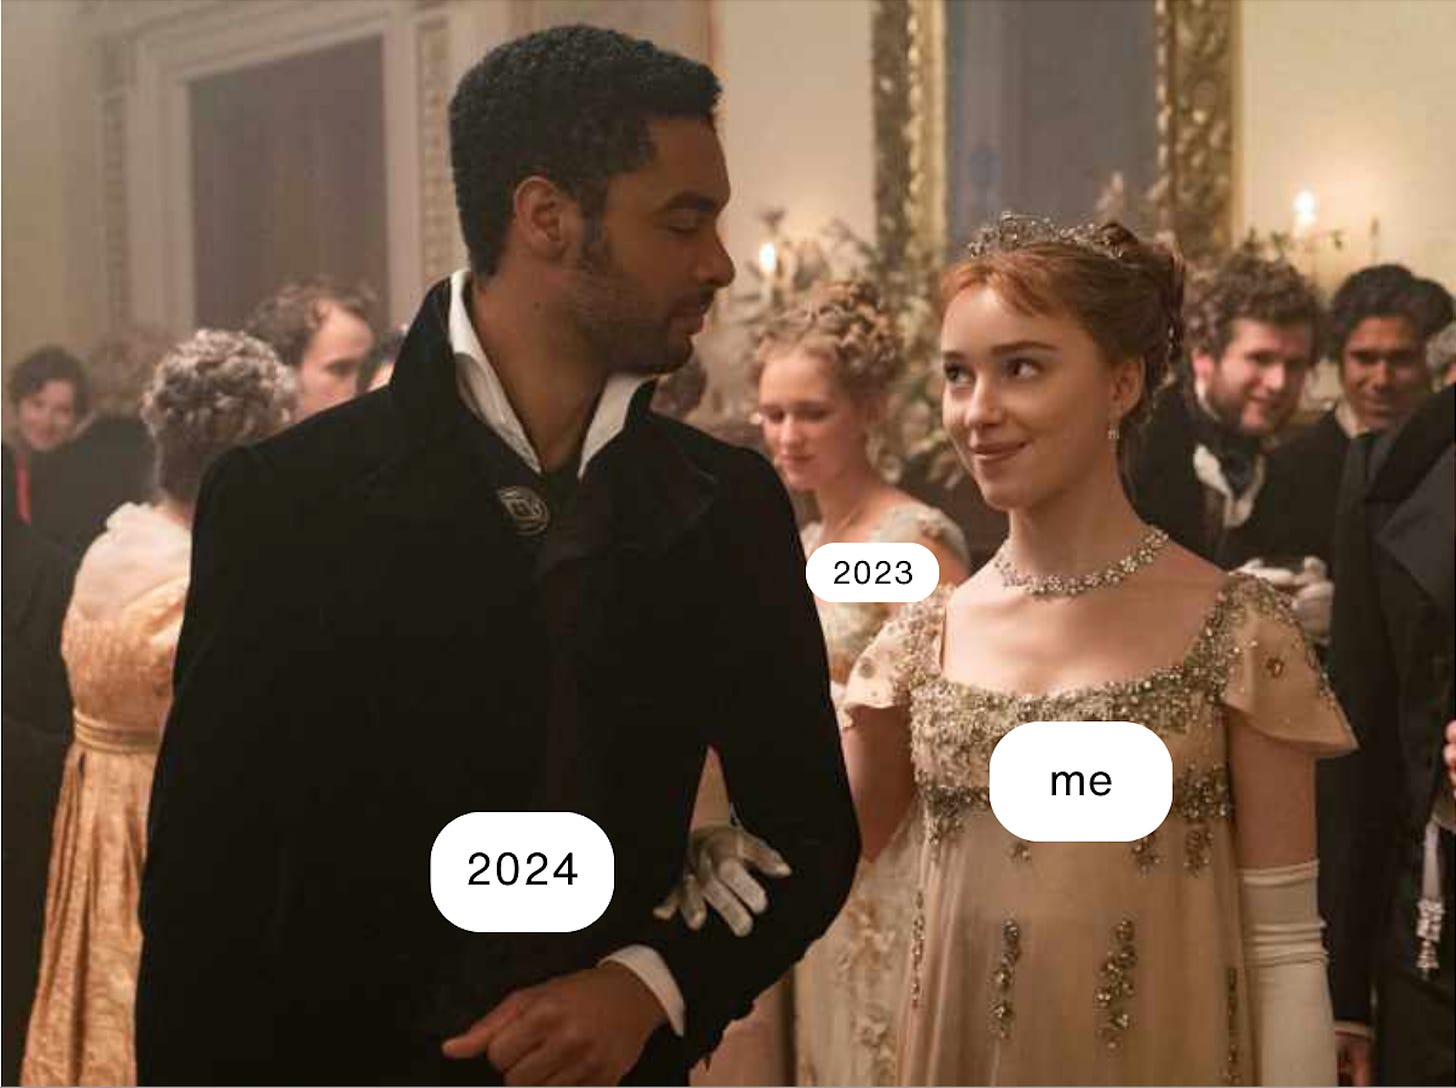 Image from the Netflix series Bridgerton with Duke and Daphne looking into each others eyes. The Duke has a label that says “2024,” Daphne’s label says “me.” Another woman in the background symbolizing 2023 looks on